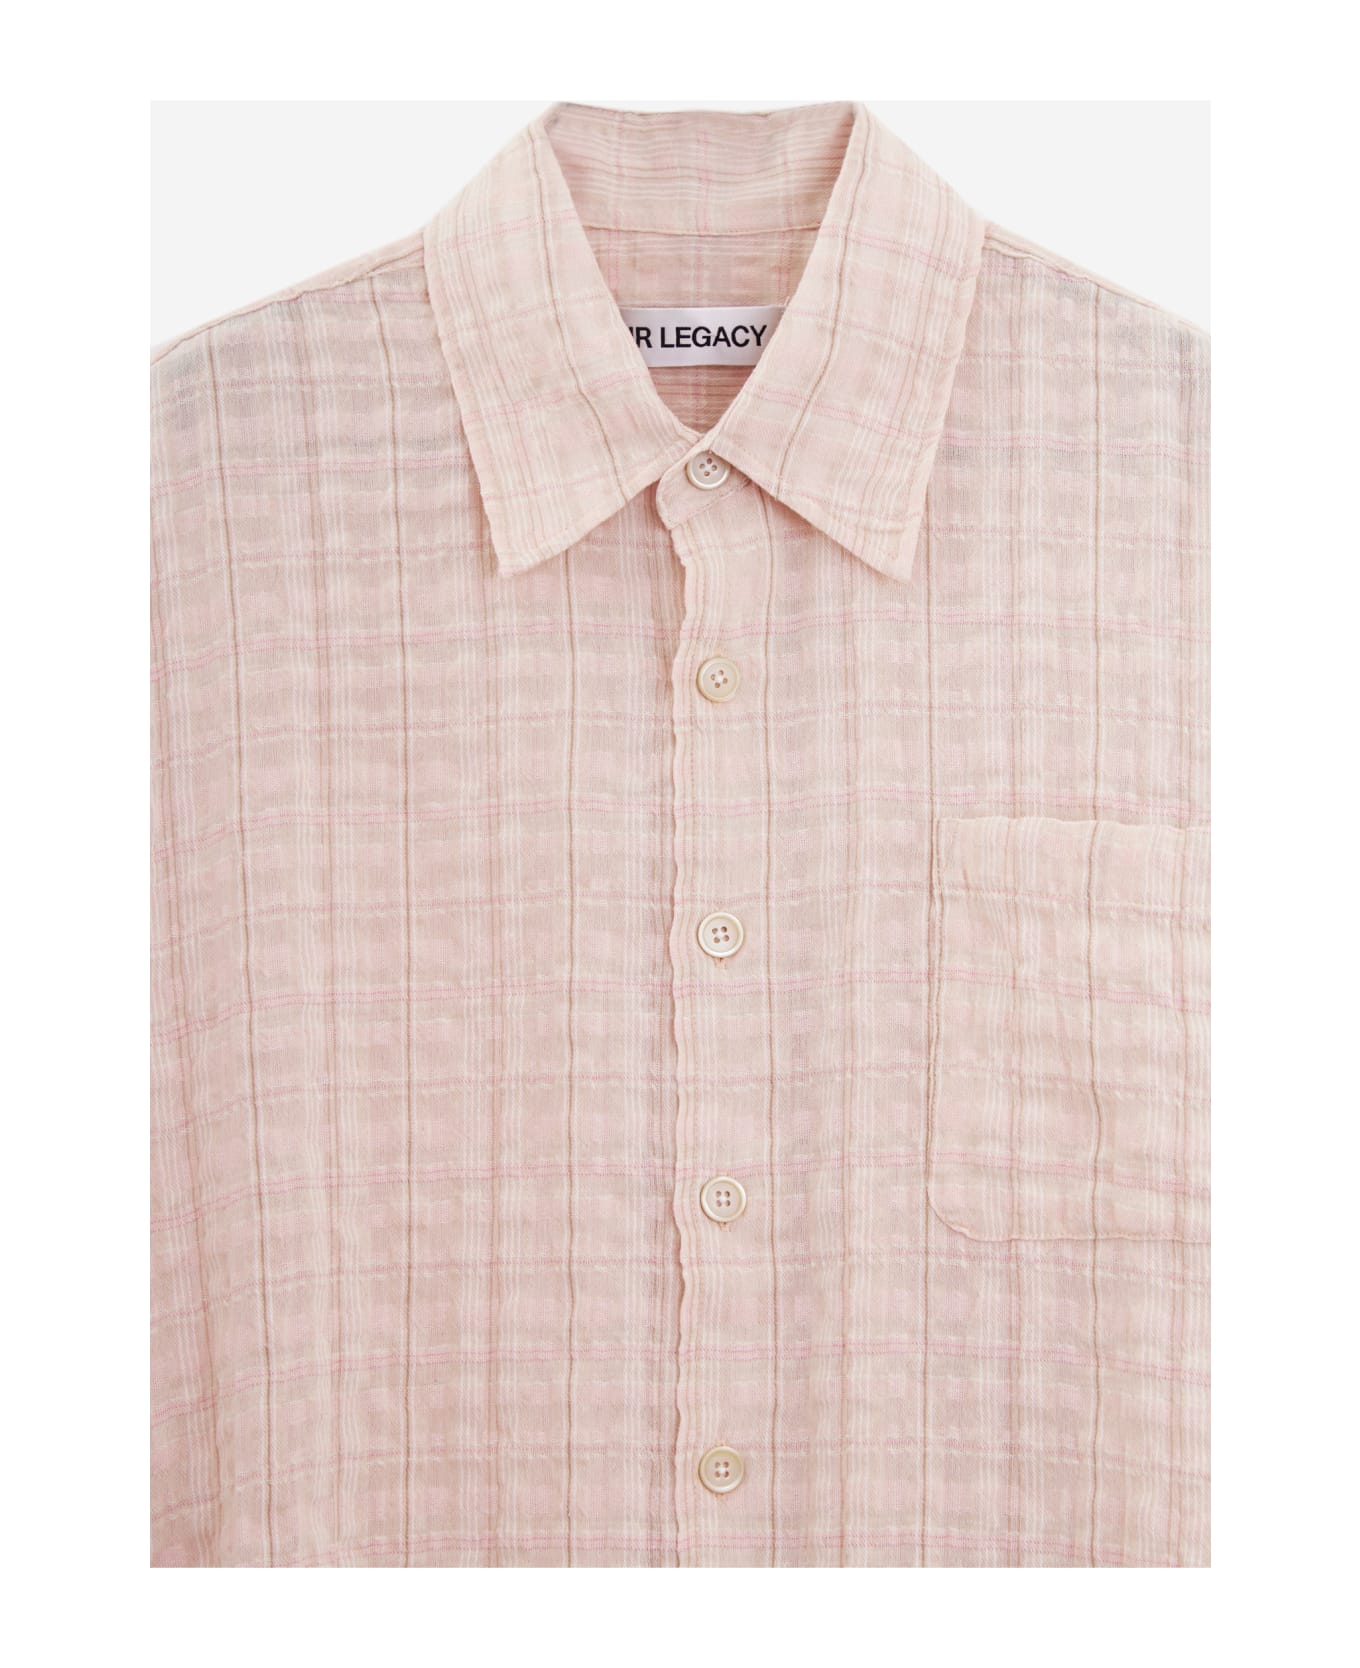 Our Legacy Borrowed Shirt - rose-pink